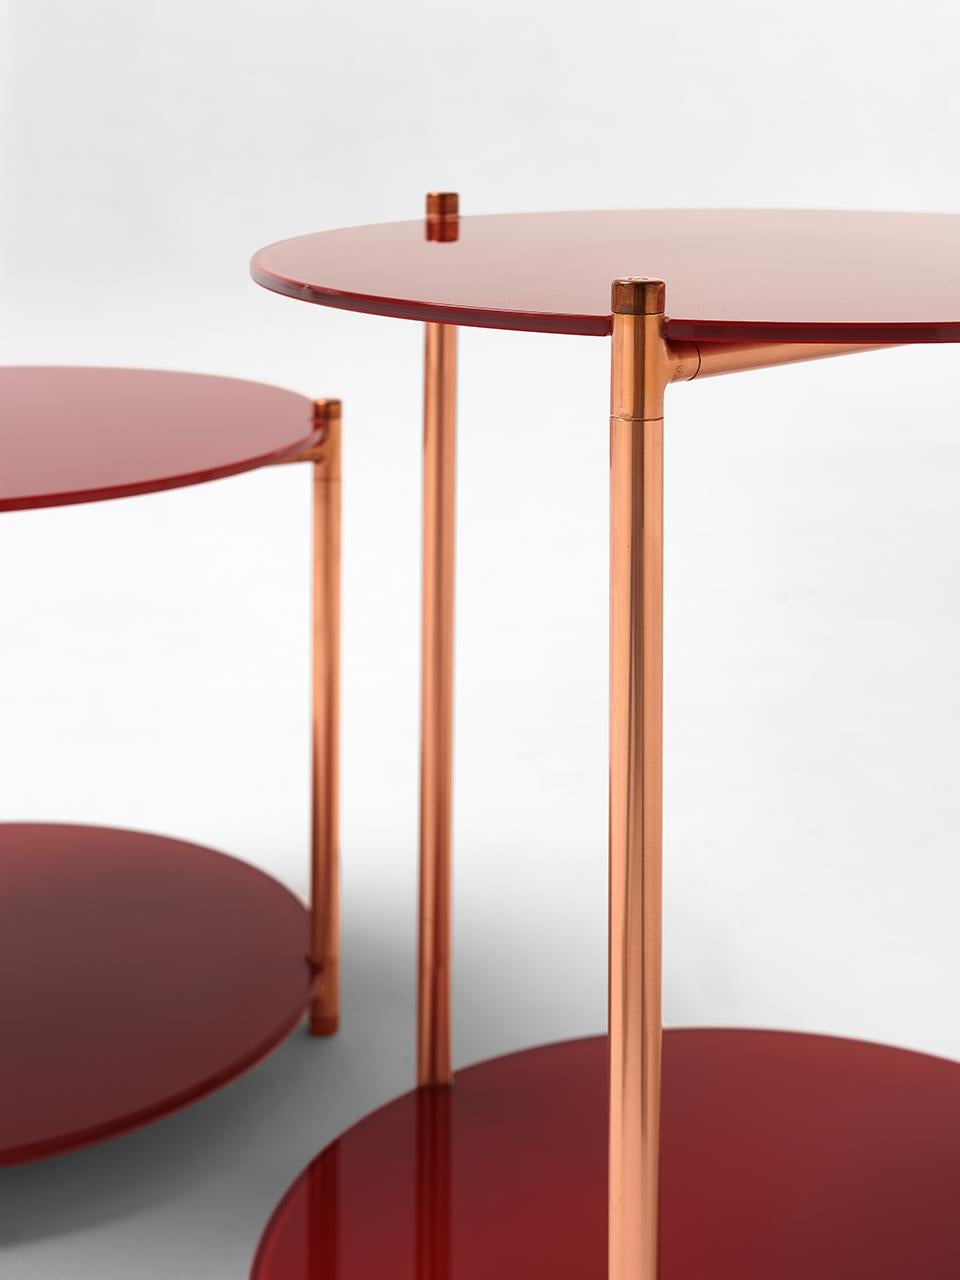 Painted 21st Century Modern Side Table With Copper Base And Back-painted Glass Shelves For Sale